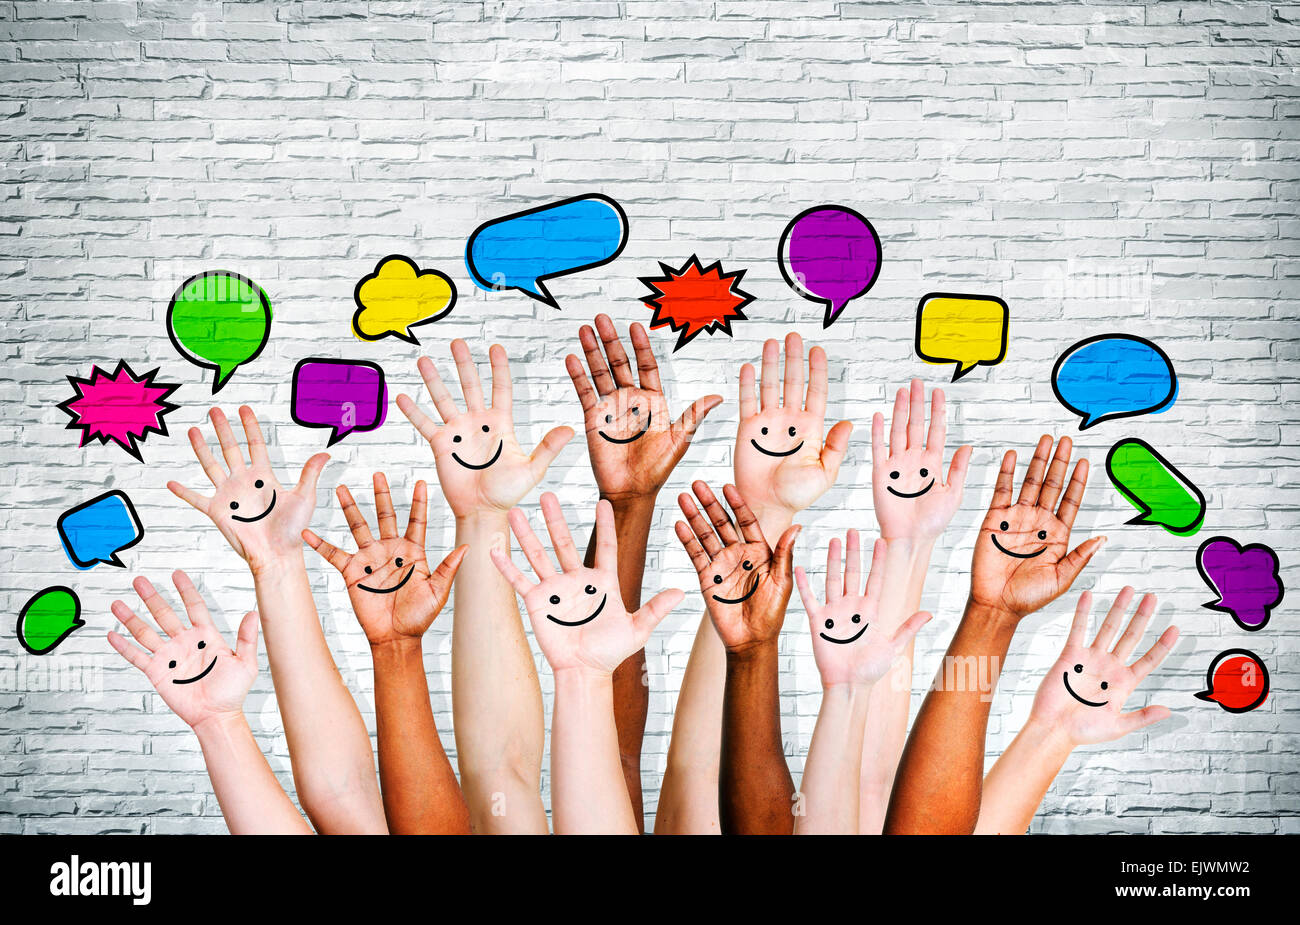 Multi ethnic people's hands raised with speech bubble by brick wall. Stock Photo